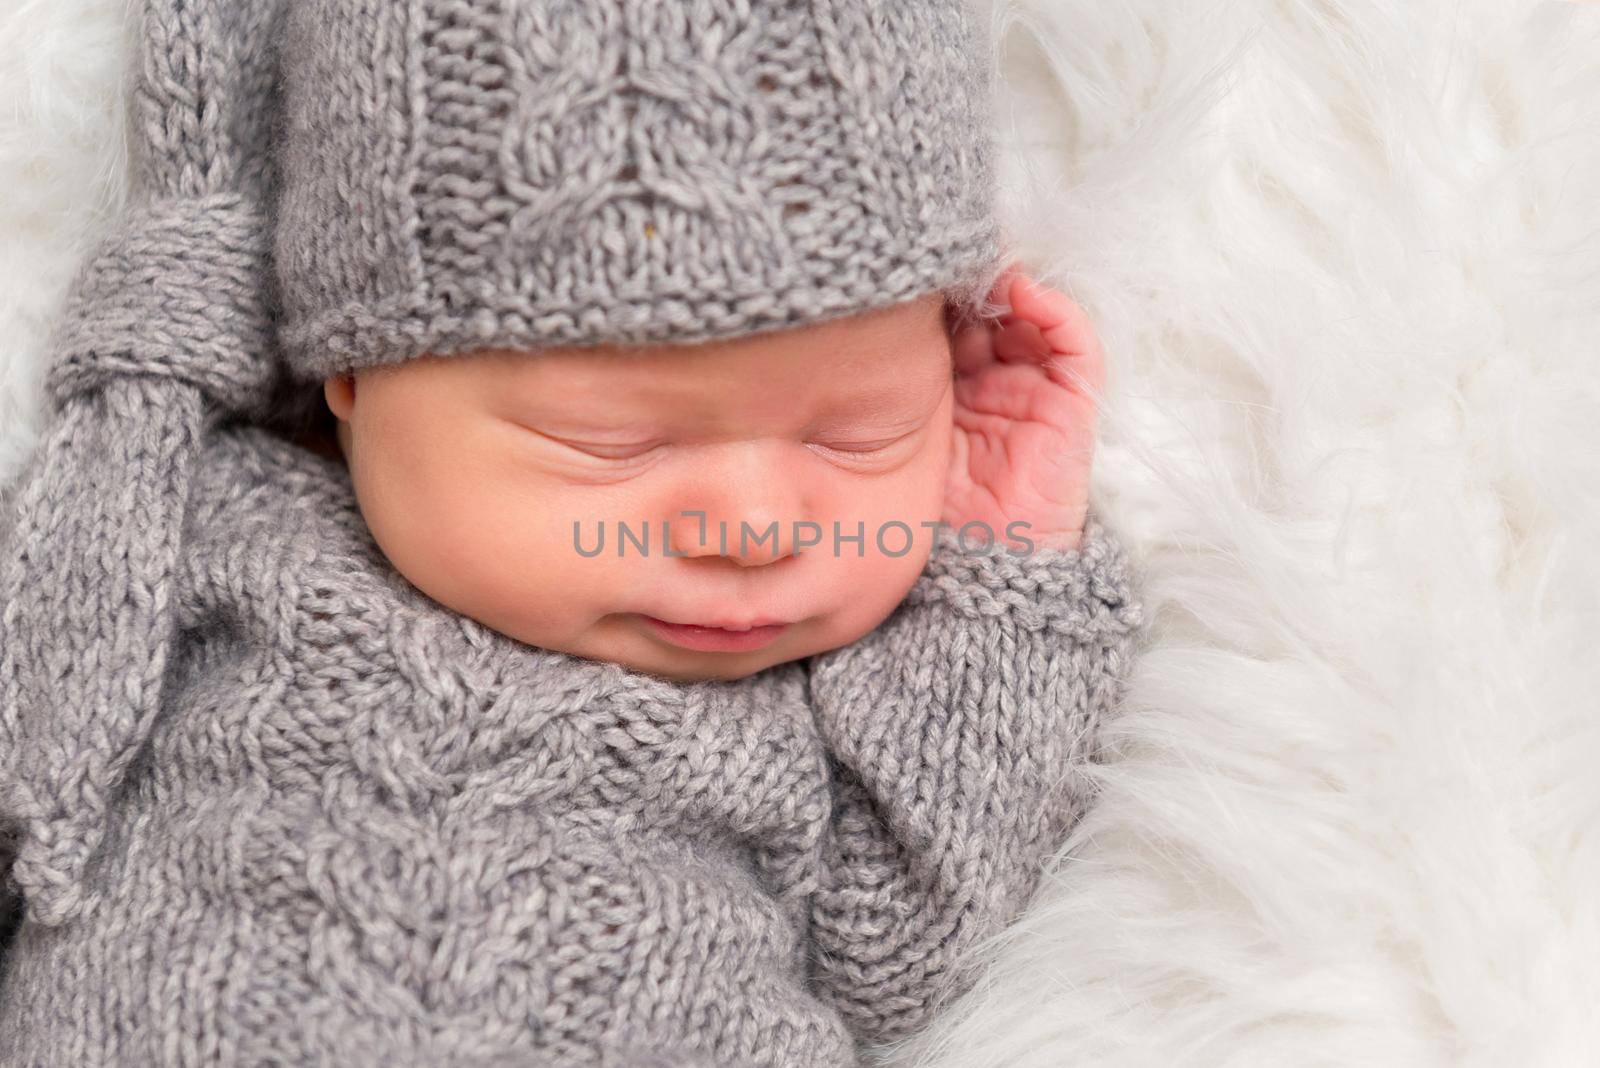 Sweet child in a hat napping all enveloped with a gray blanket, closeup